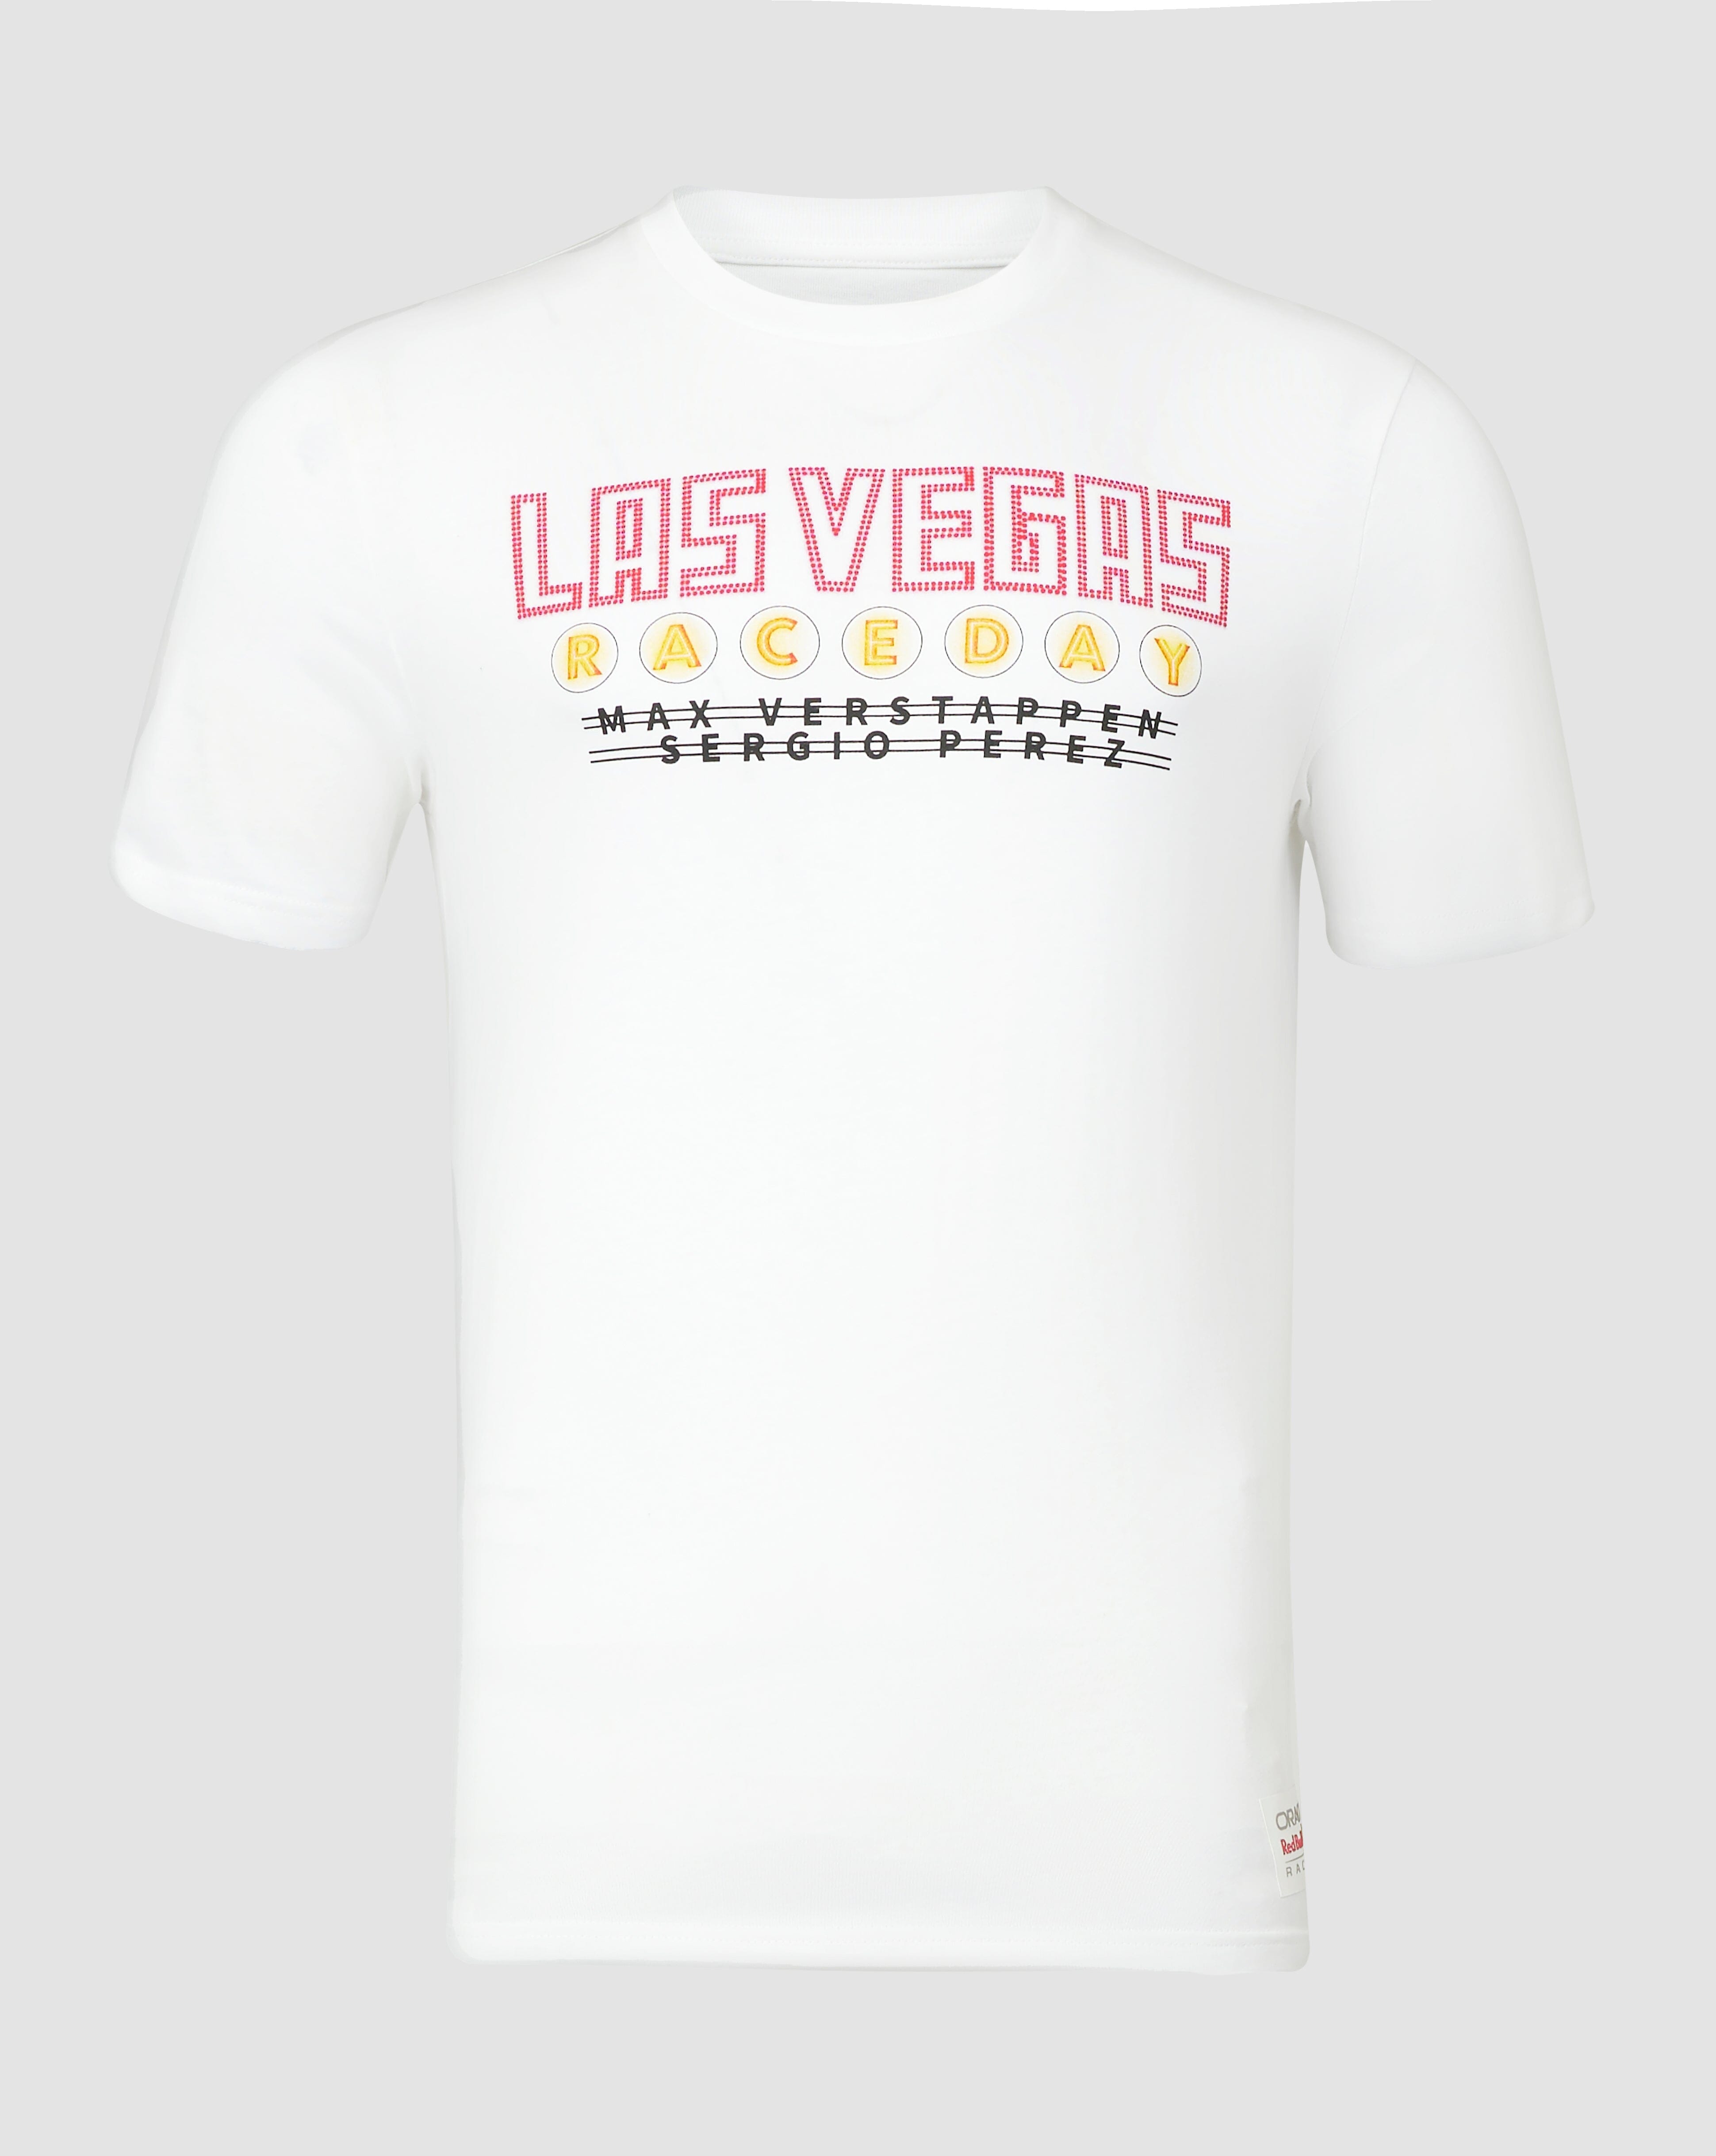 Red Bull Racing T-Shirt Las Vegas Special GP - Edition F1 White